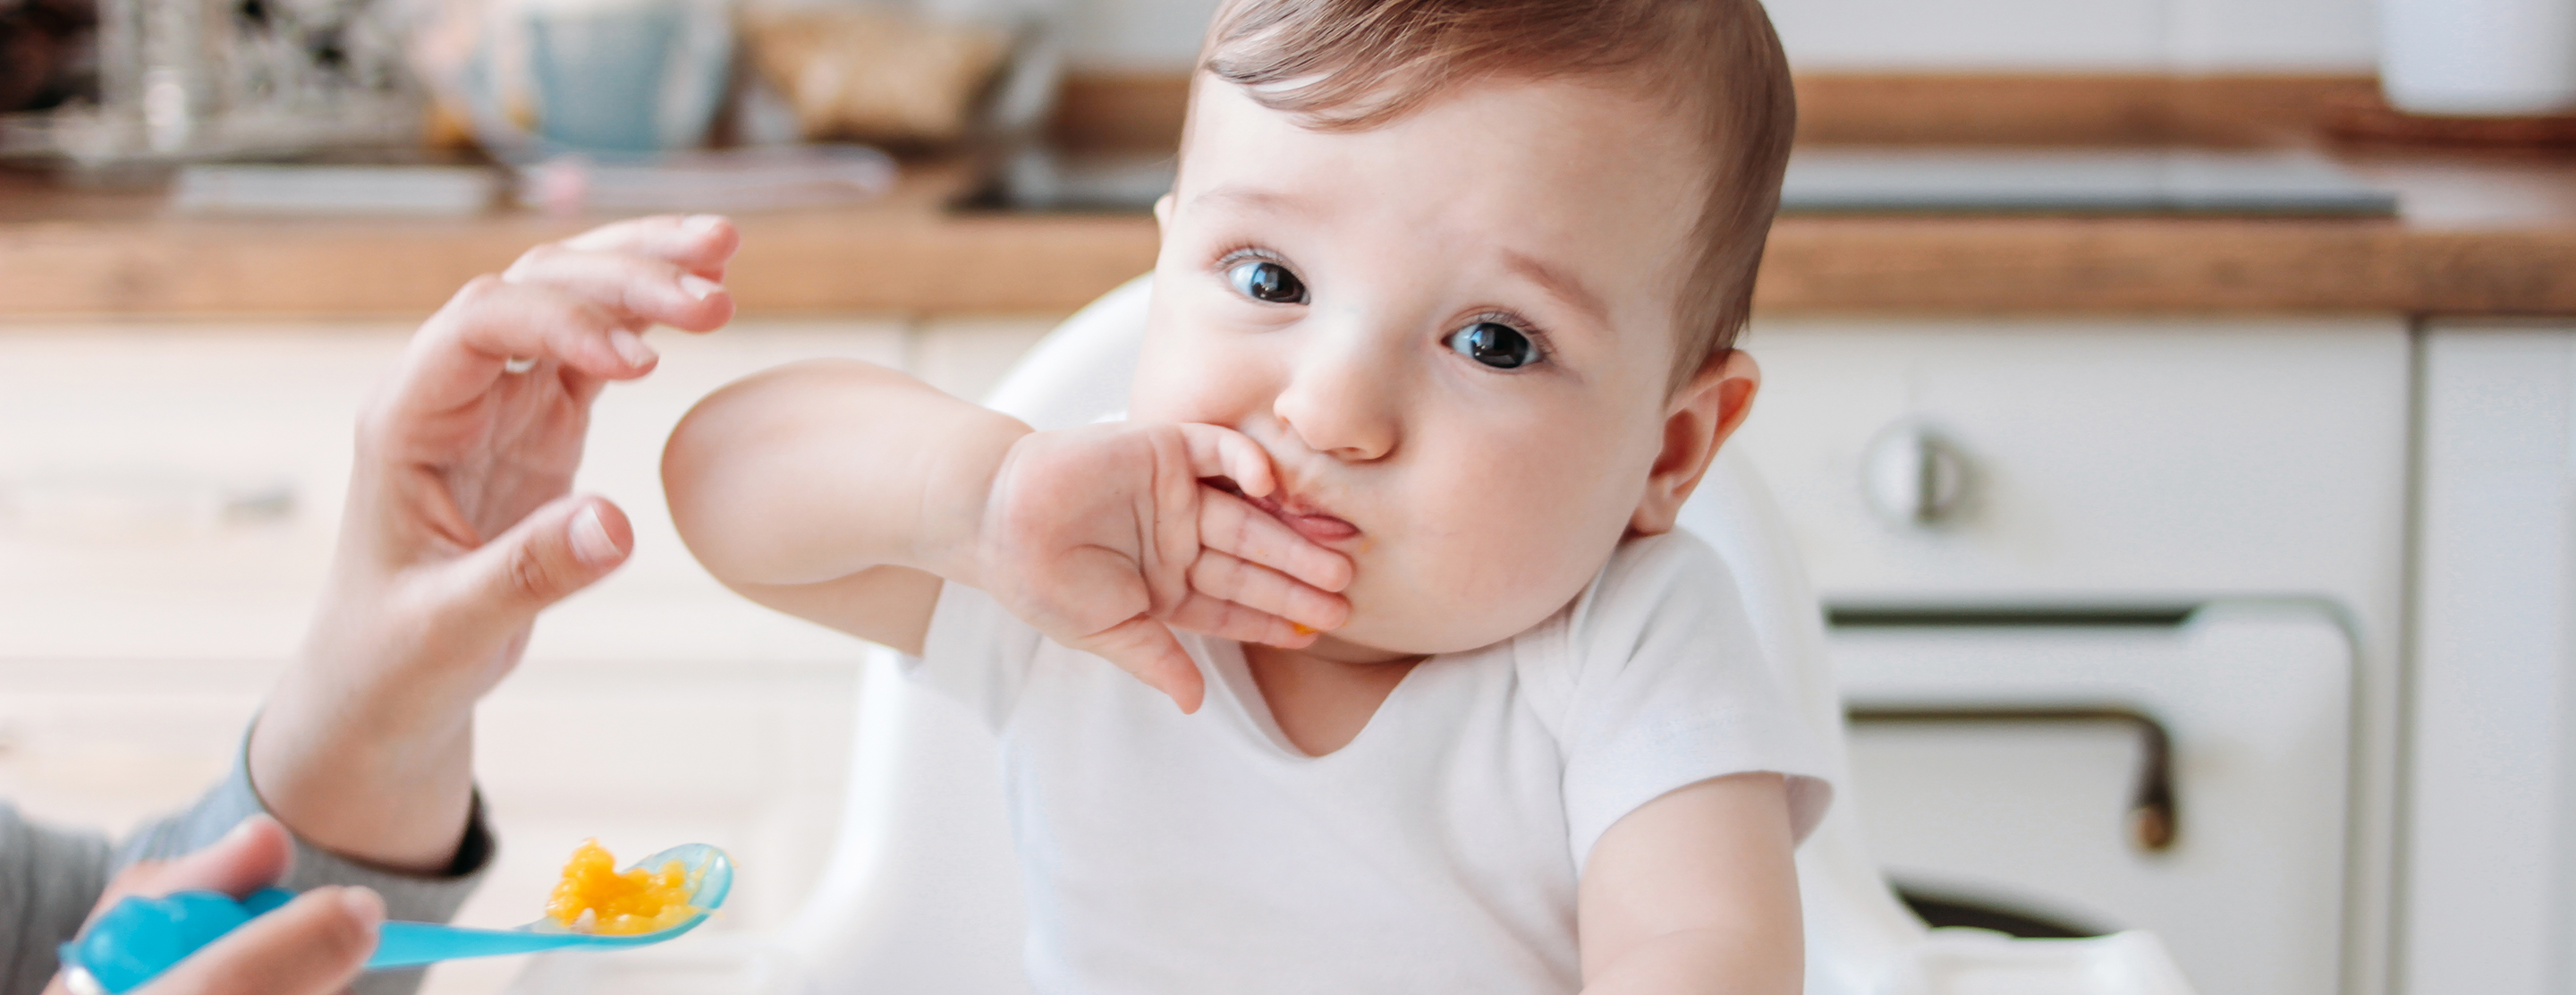 https://www.ucsfbenioffchildrens.org/-/media/project/ucsf/ucsf-bch/images/education/hero/faq-introducing-your-baby-to-solid-foods-2x.jpg